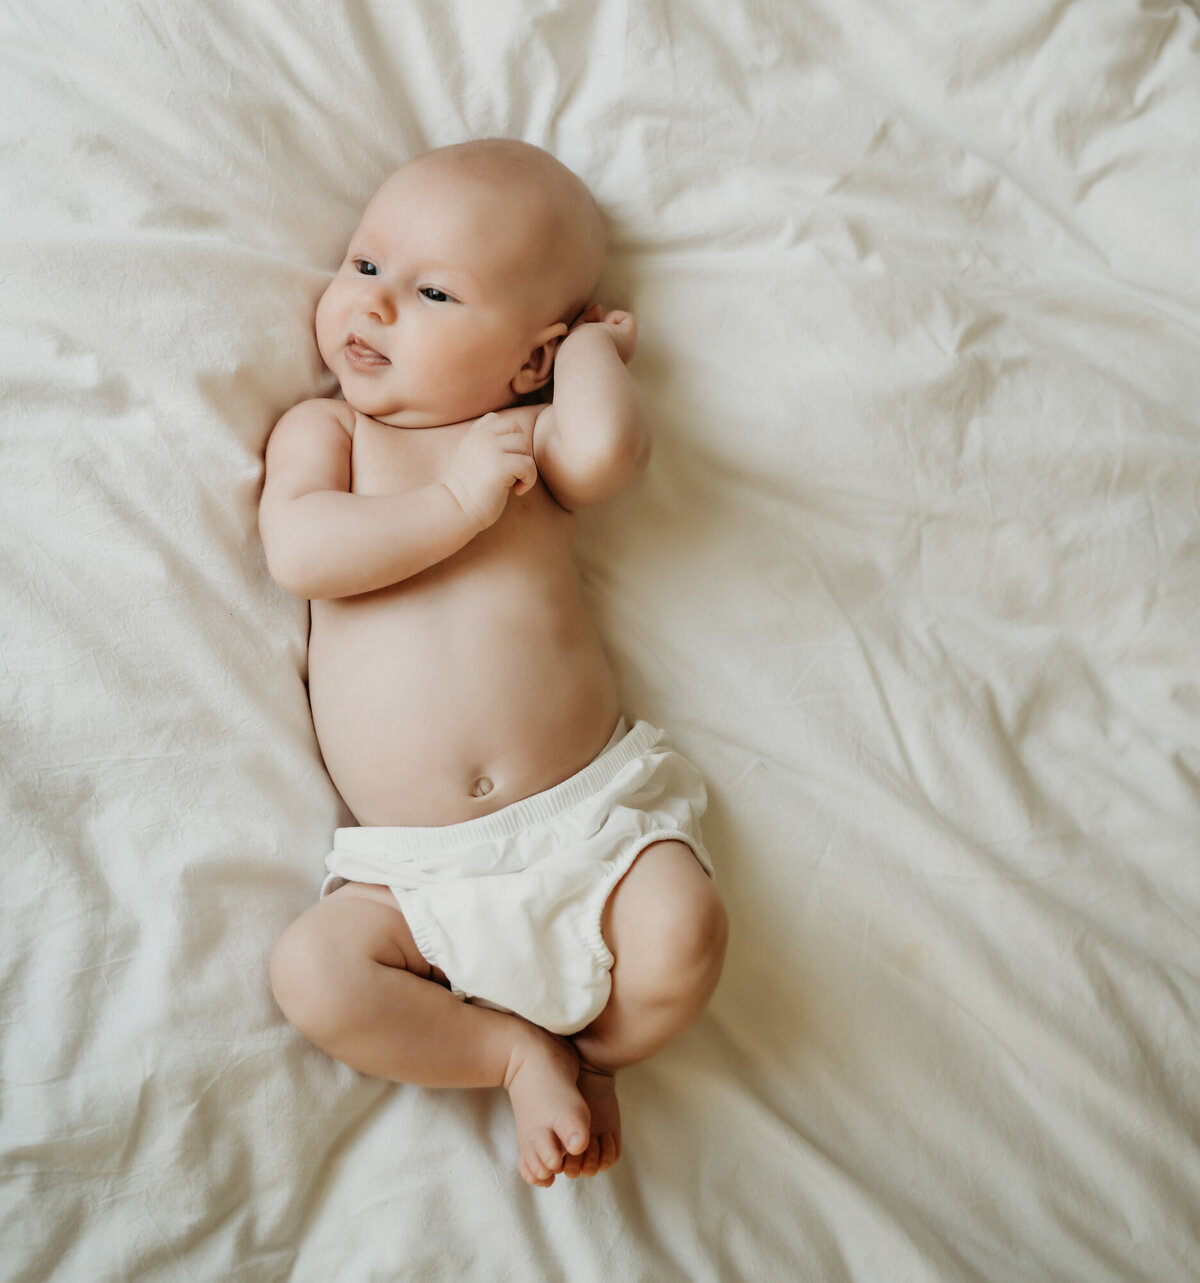 Newborn Photographer, Baby in a diaper cover on a white bed, stretching.